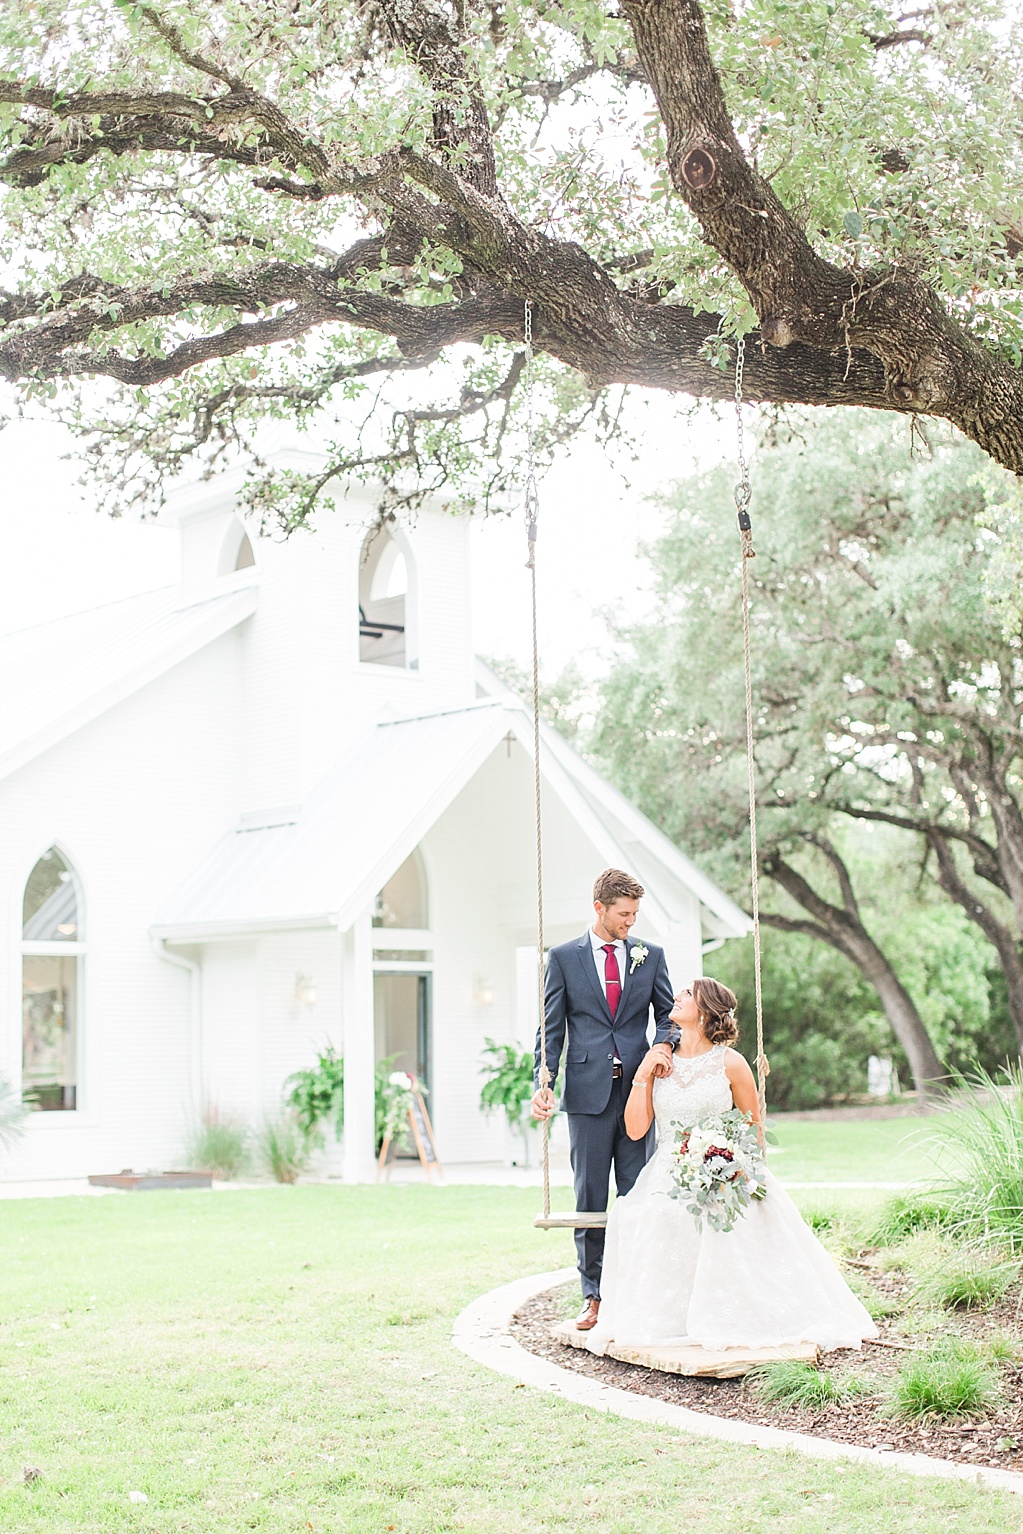 The Chandelier of Gruene New Braunfels Wedding photos featuring burgundy, navy, and grey wedding colors by Allison Jeffers Photography 0106